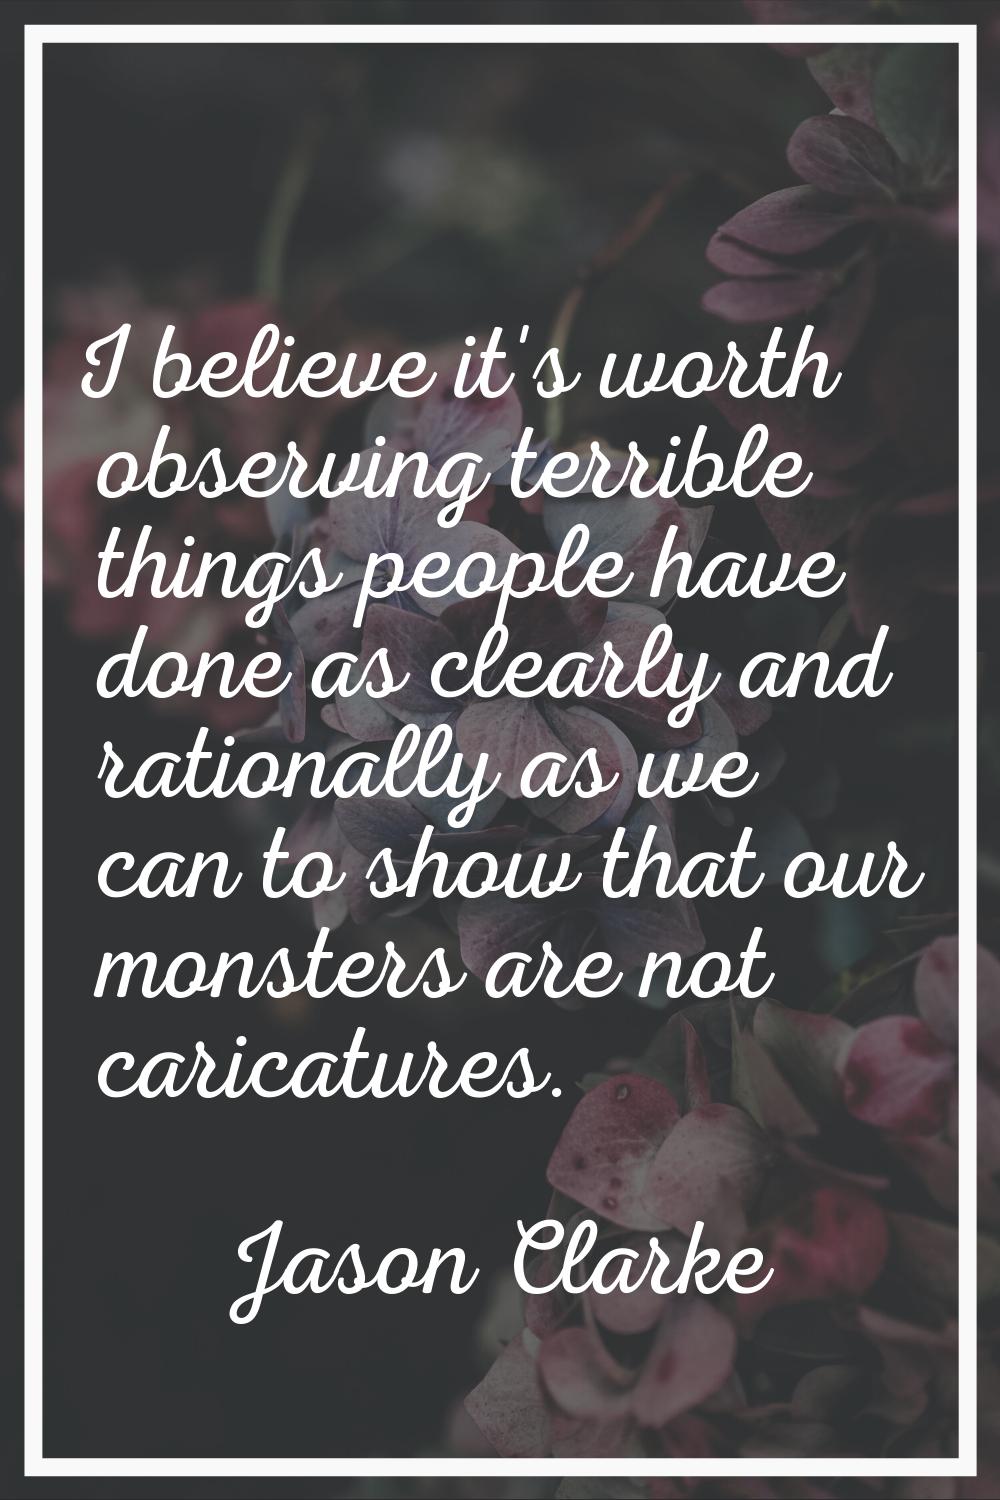 I believe it's worth observing terrible things people have done as clearly and rationally as we can